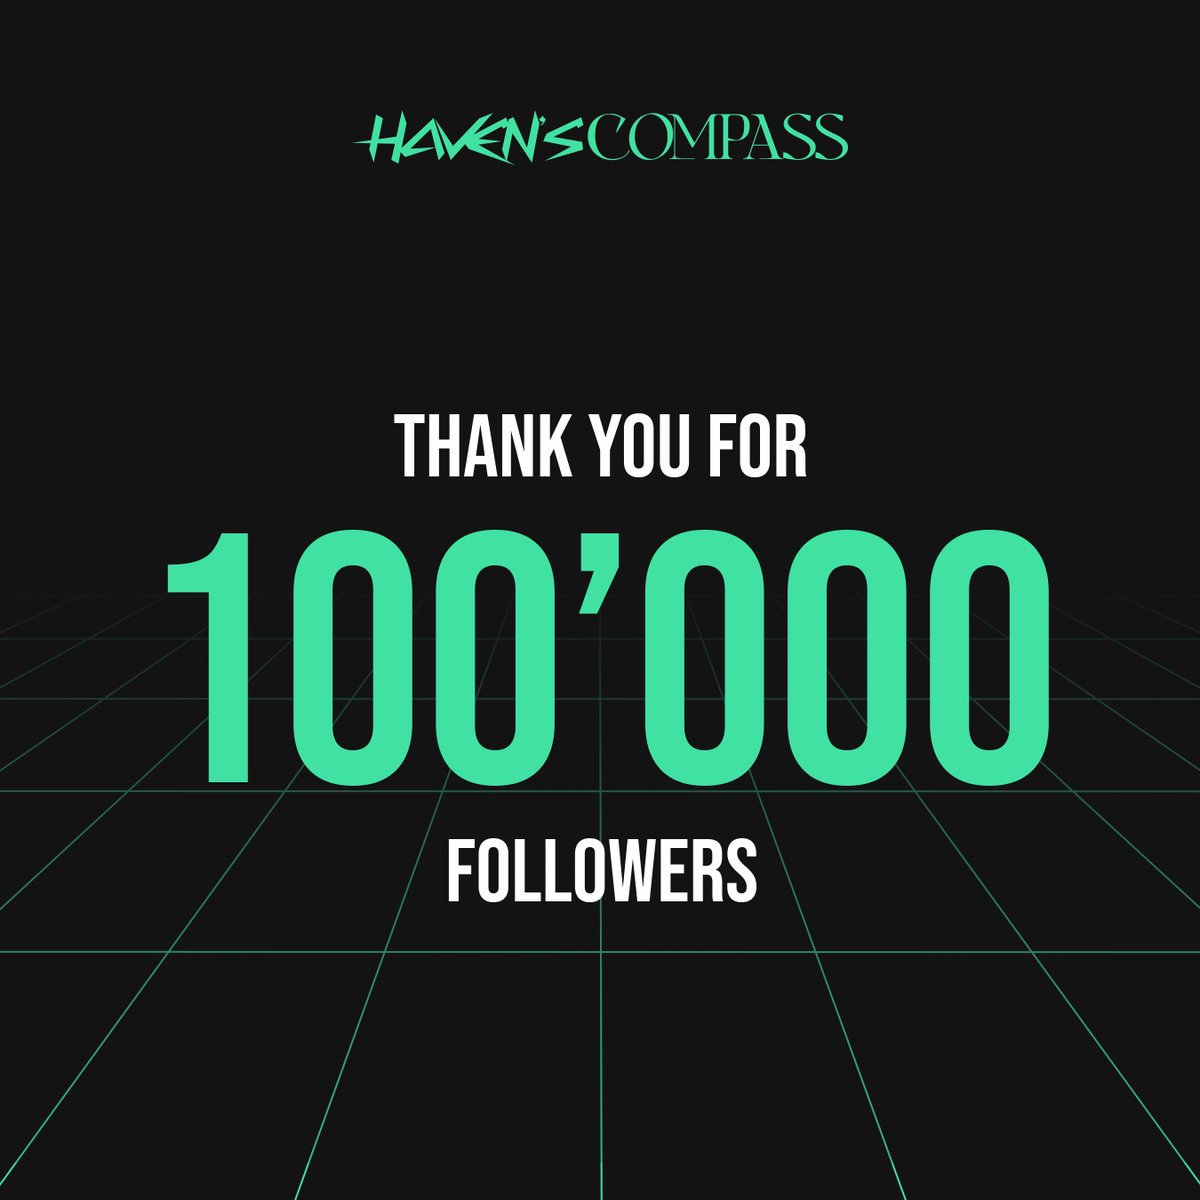 We have reached 100’000 followers🚀 Thank you to our amazing community for the incredible support! Stay tuned for more exciting updates & click the link below to join the conversation on Telegram t.me/havenscompass